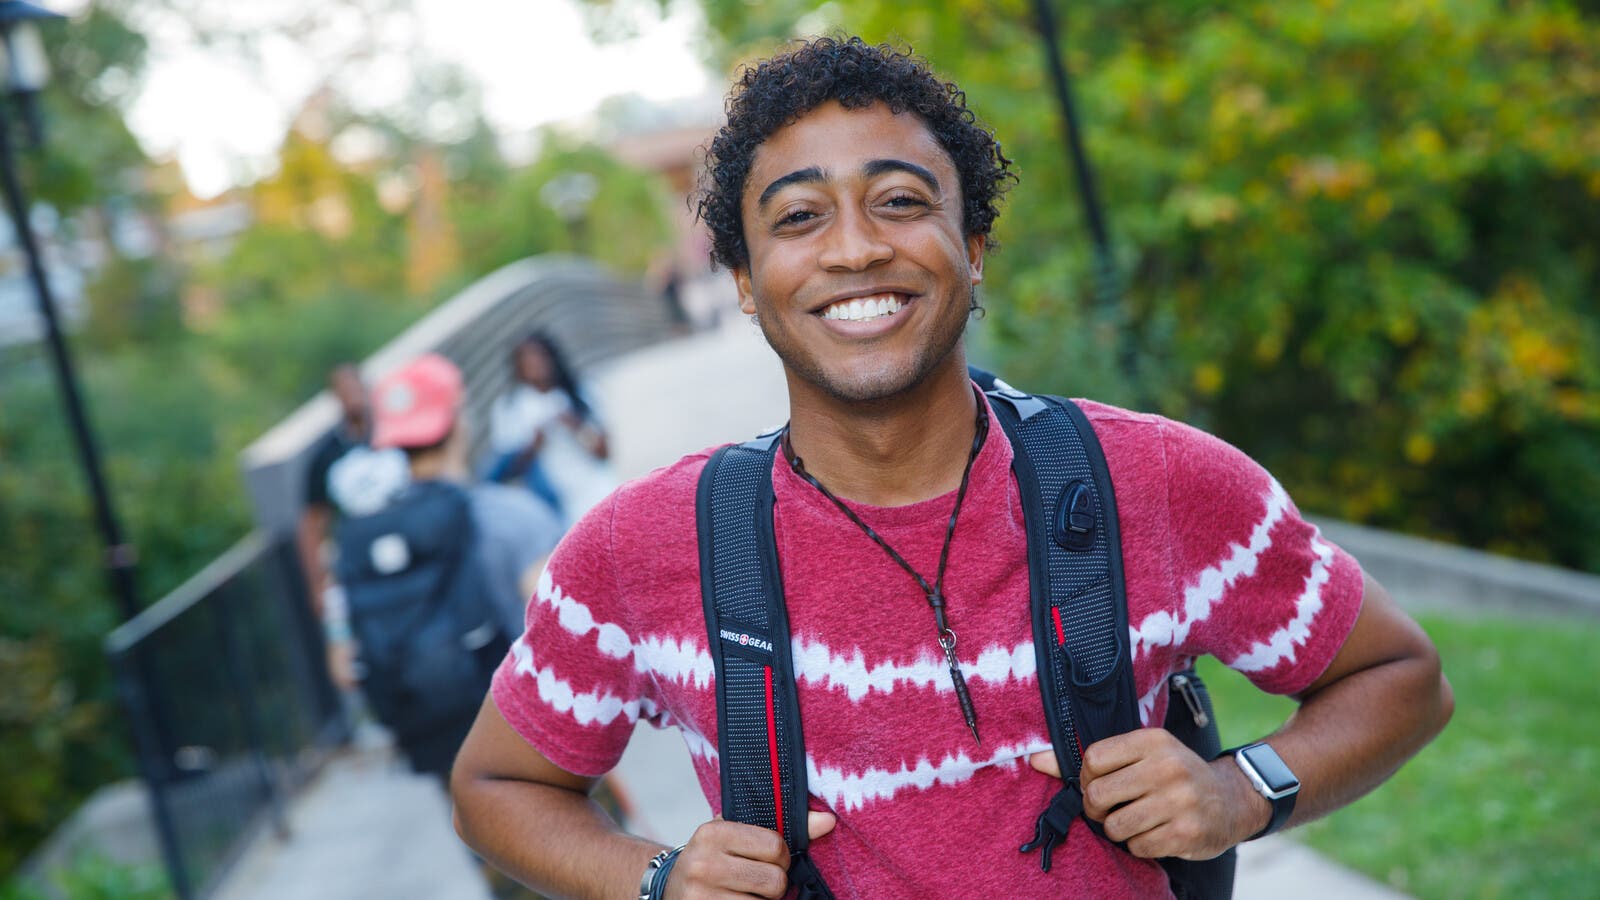 Student walking and smiling with backpack on